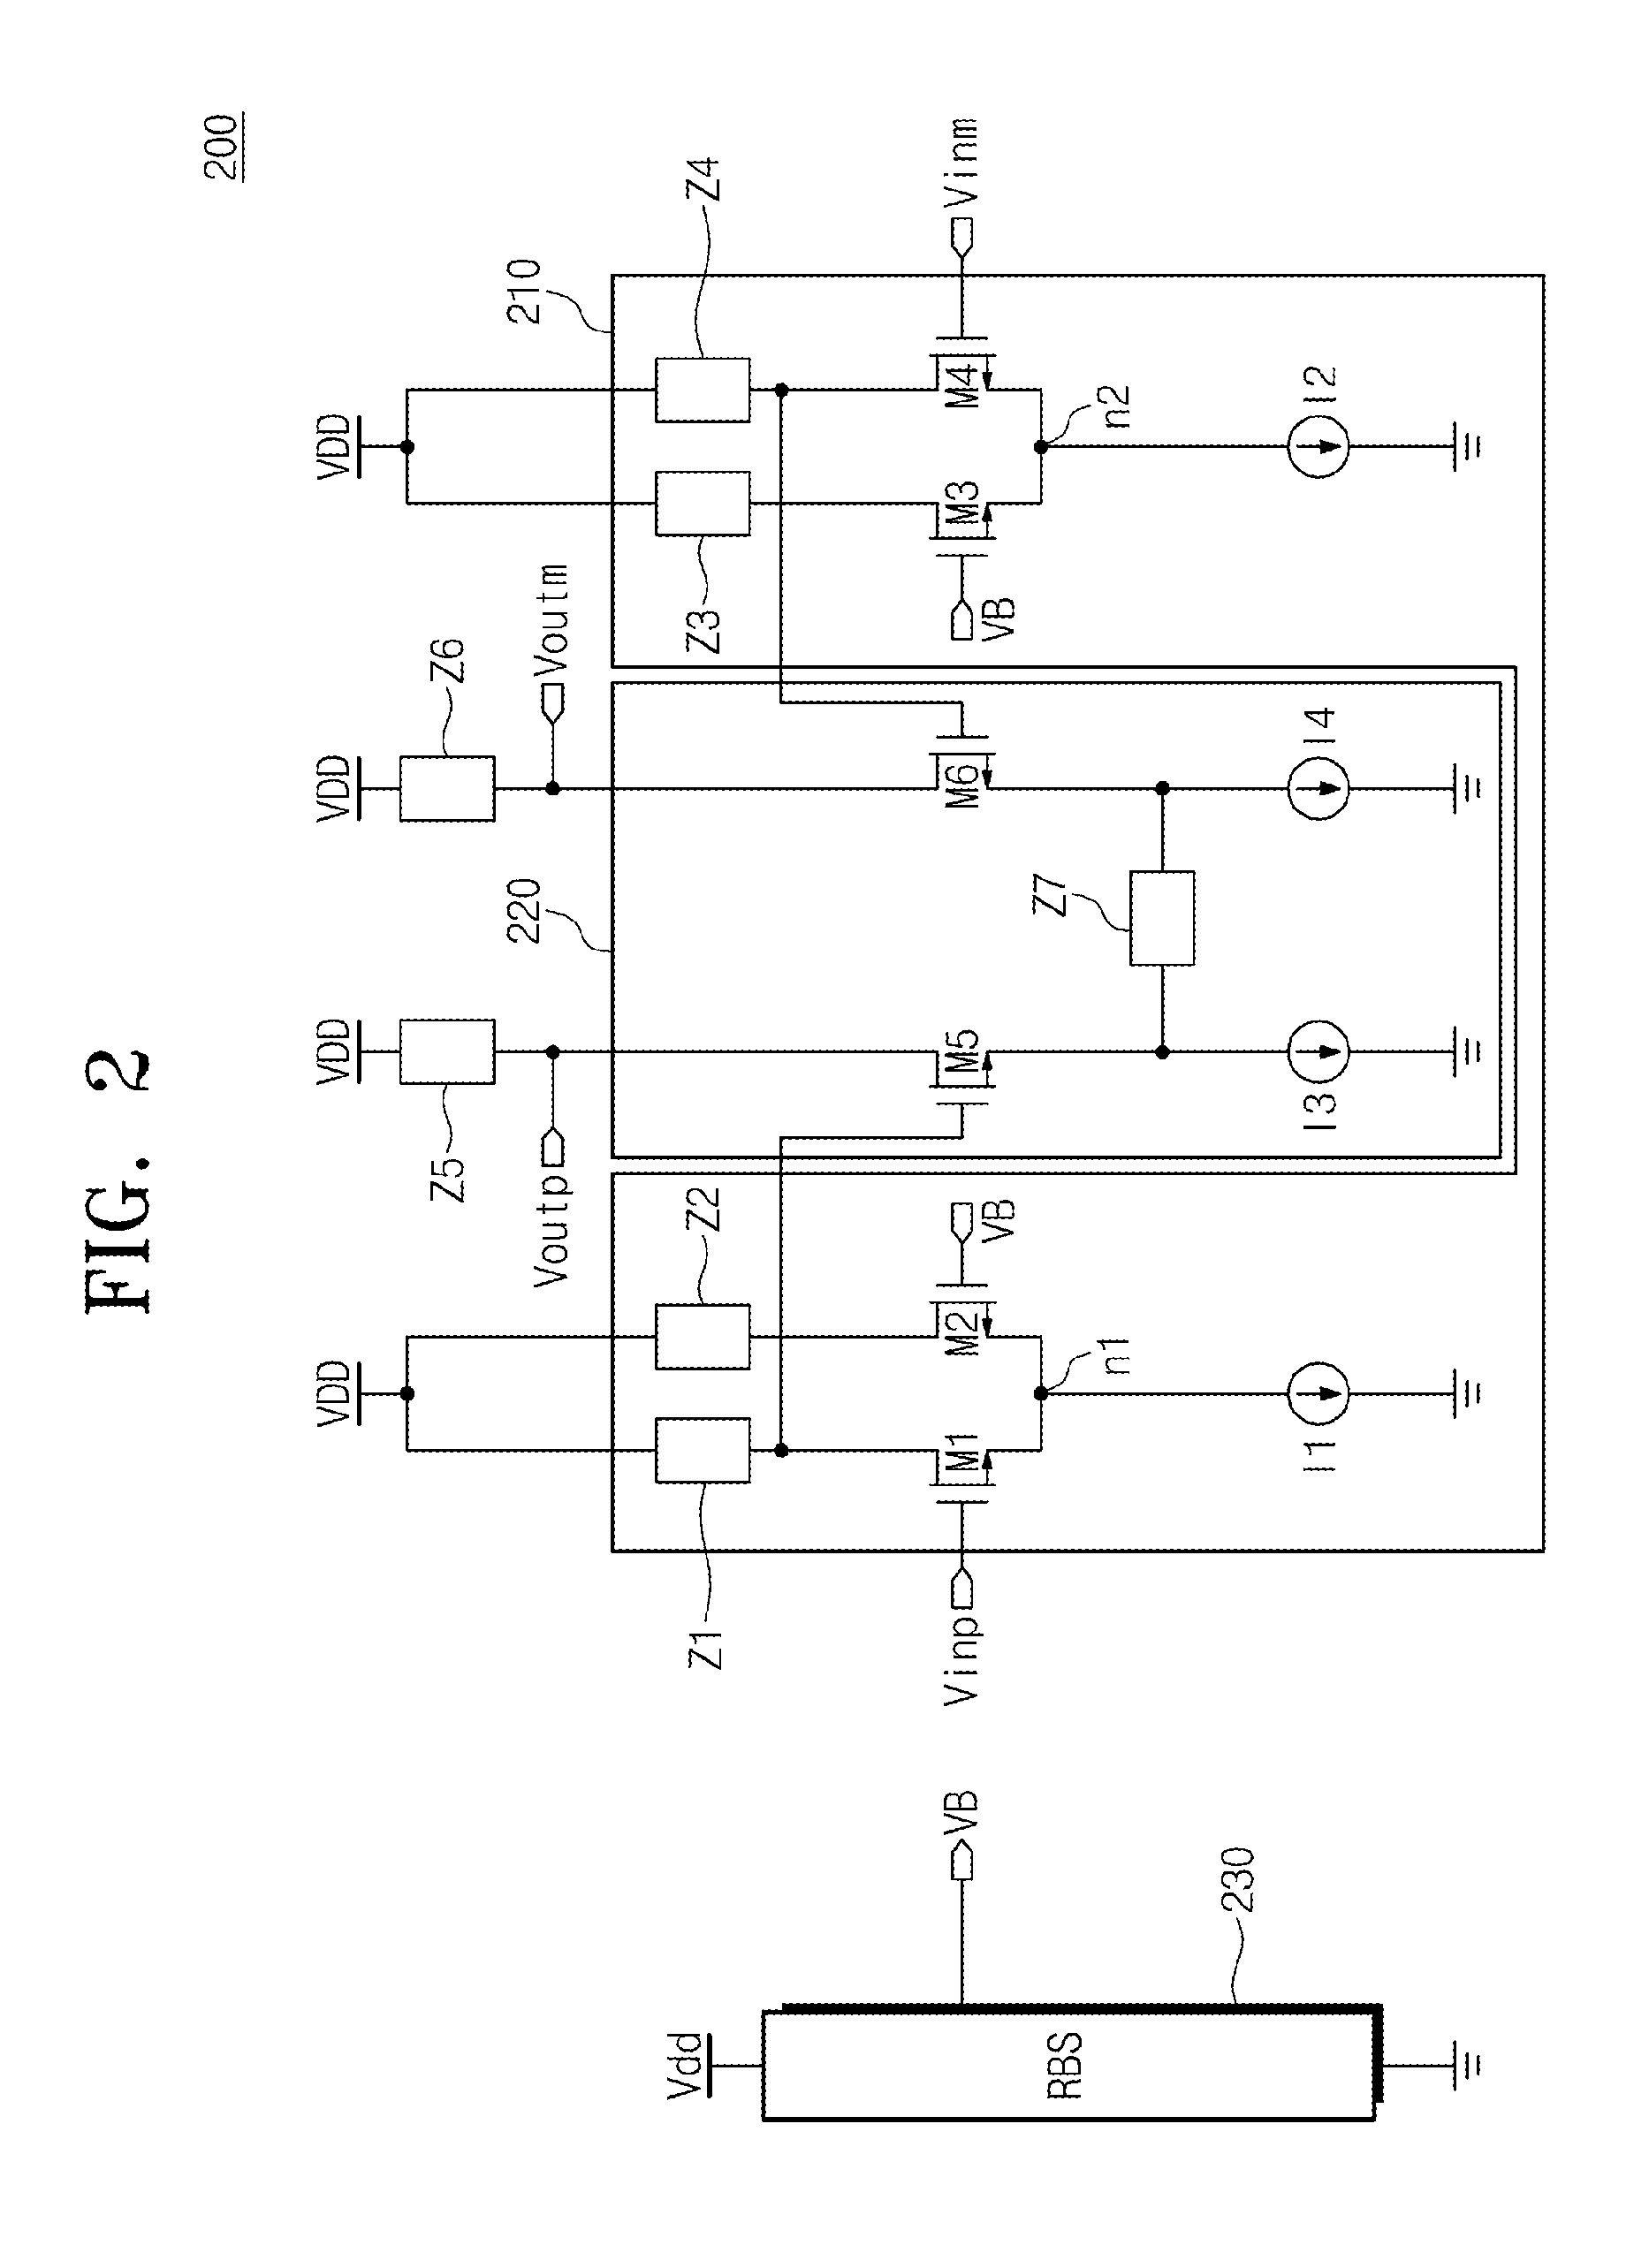 Buffer amplifier and trans-impedance amplifier including the same